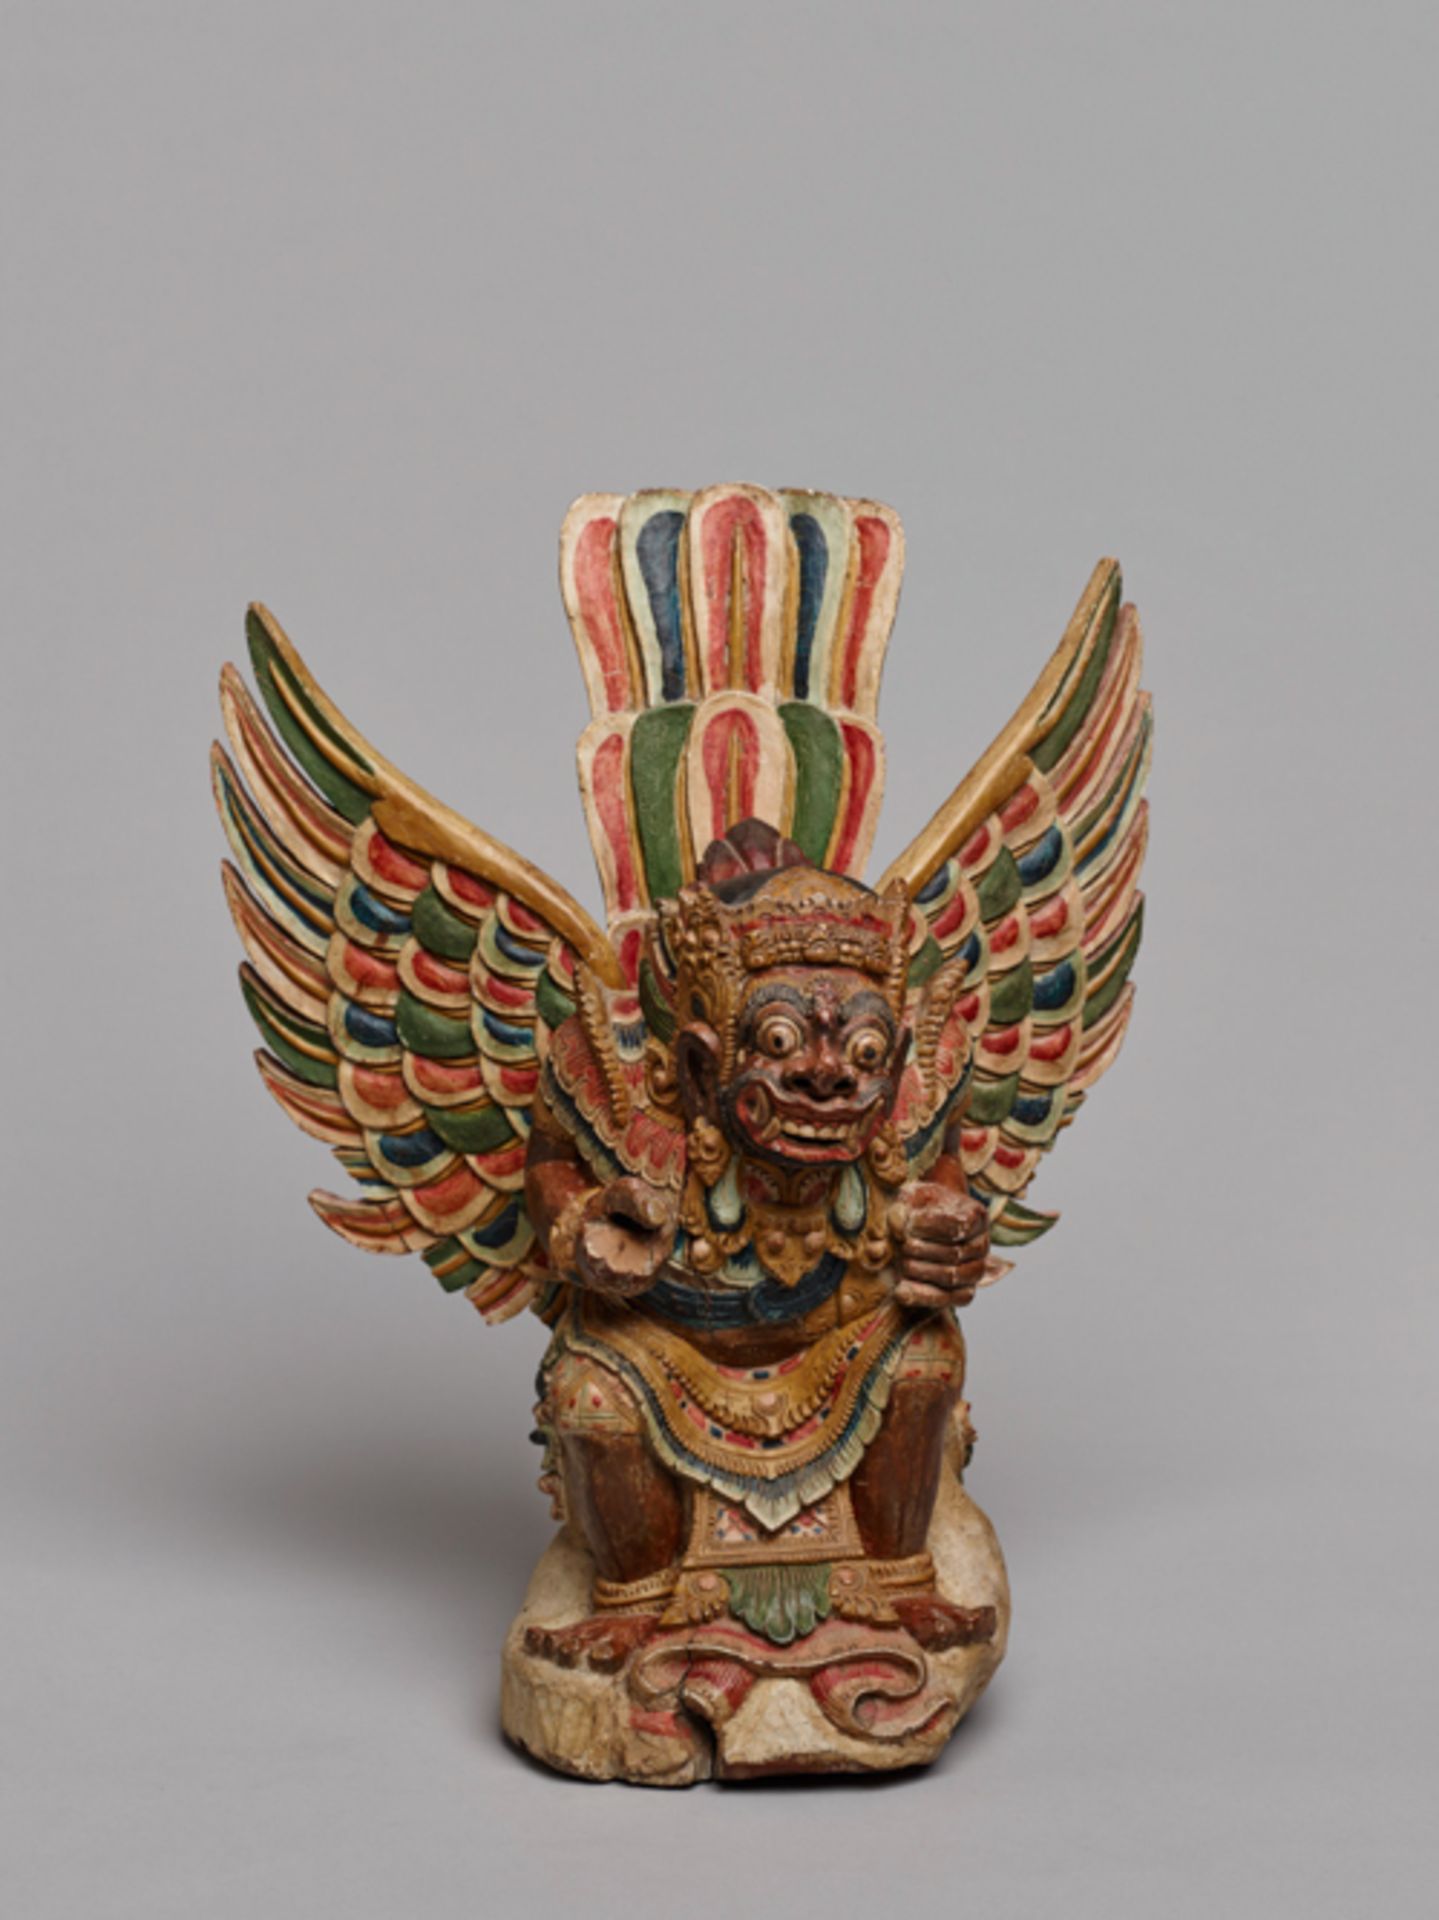 GARUDA  Painted wood. Indonesia, Bali, late 19th cent. to 1st half 20th cent.  Sculpture with